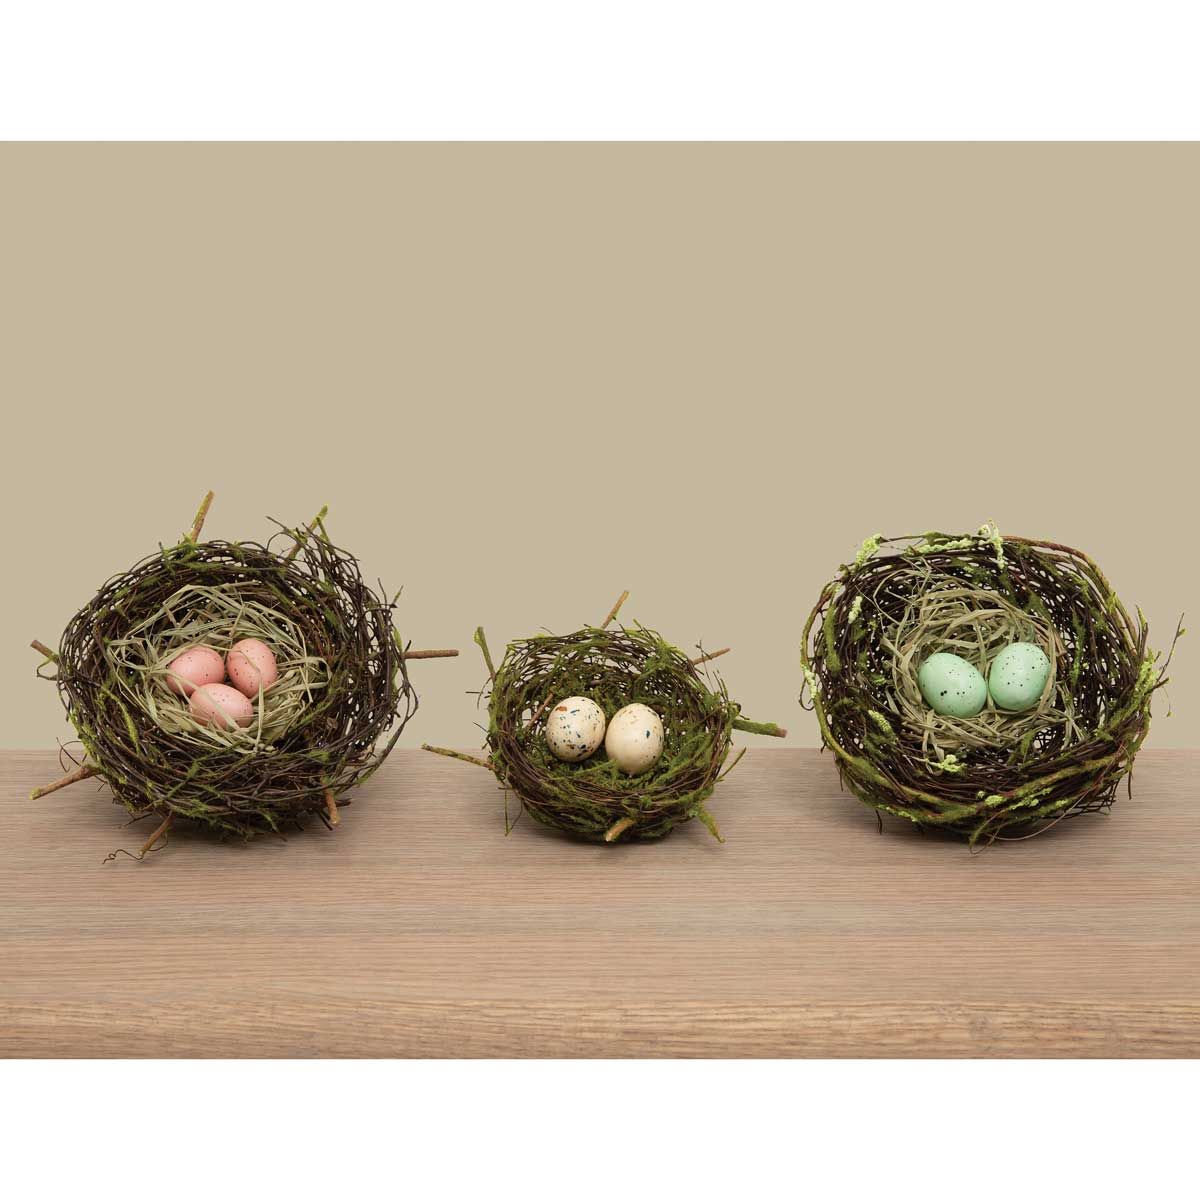 TWIG NEST WITH BLUE EGGS 6IN X 2.5IN TWIG/WOOD - Click Image to Close